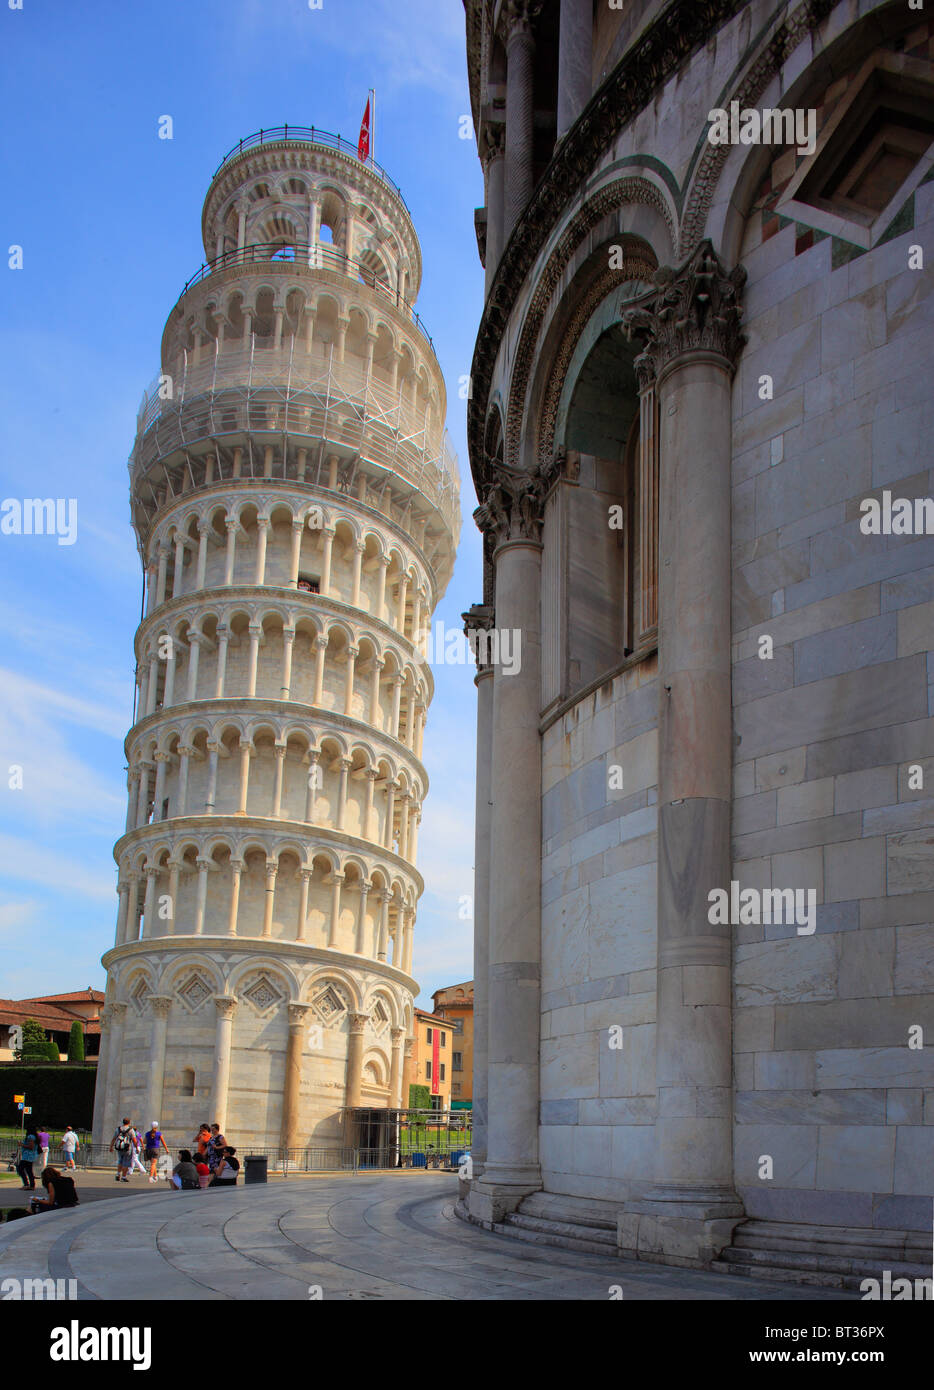 The Leaning Tower in Pisa's Square of MIracles, Italy Stock Photo